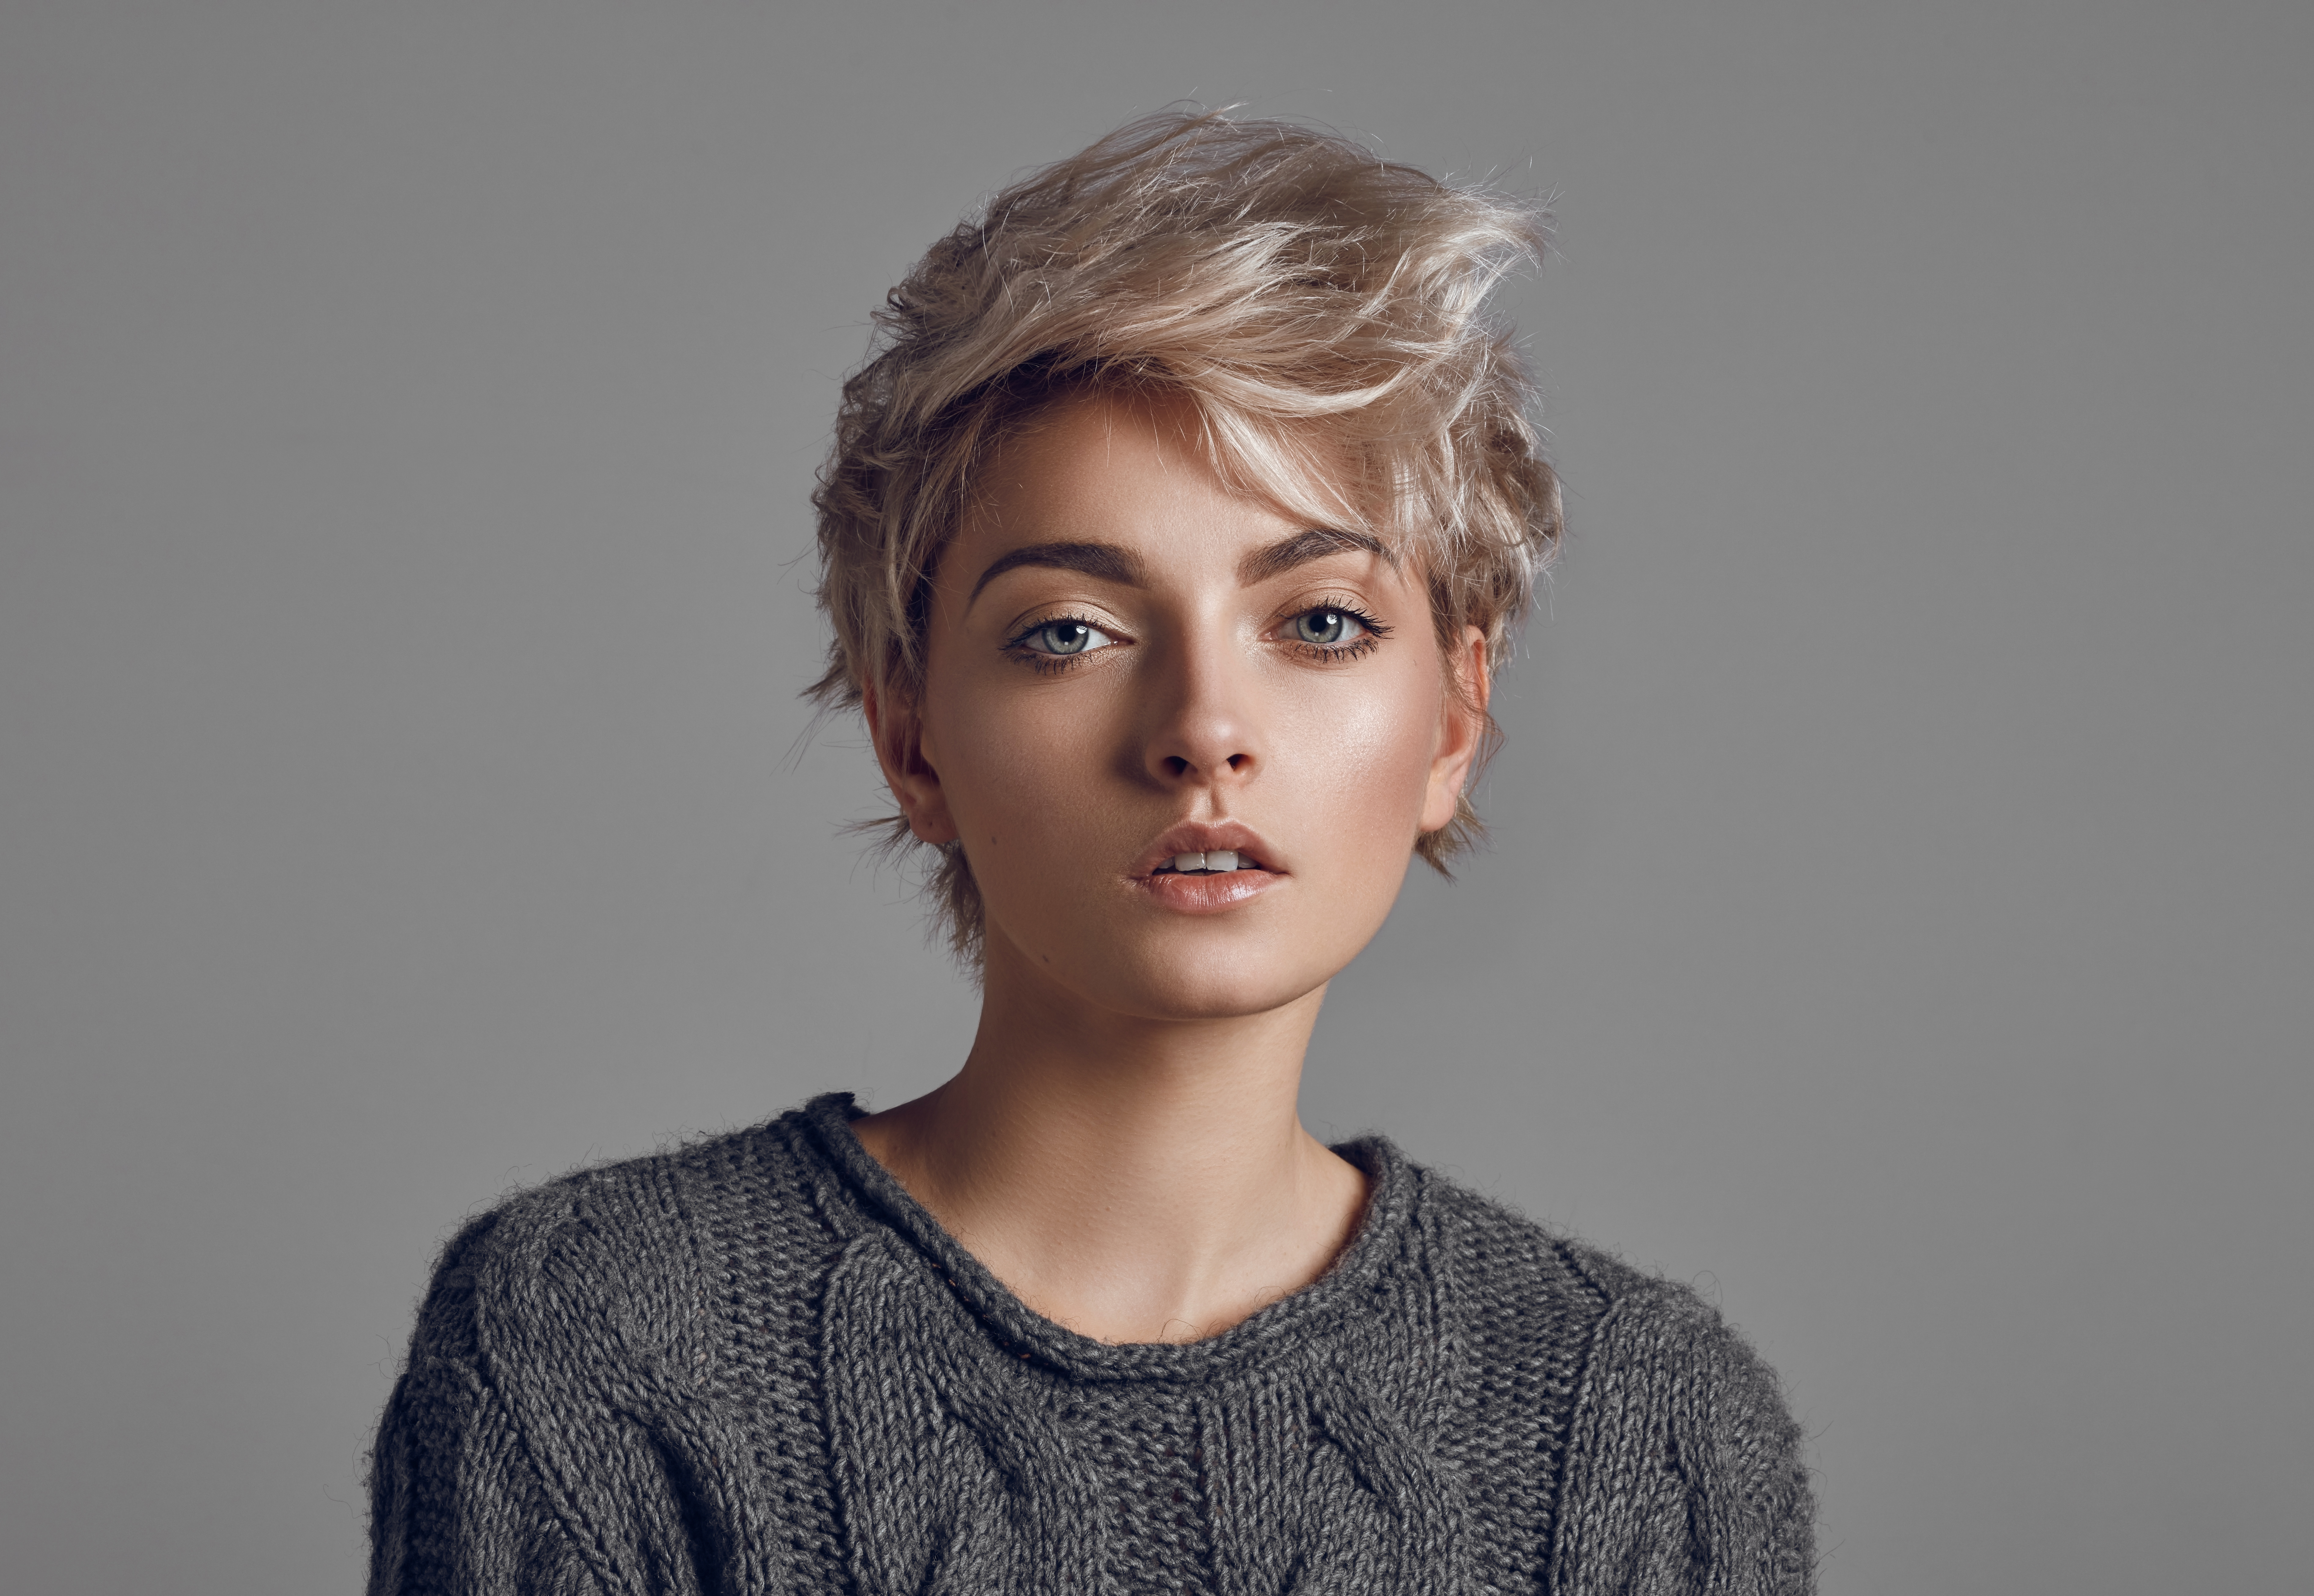 A young woman with short, blond hair | Source: Shutterstock